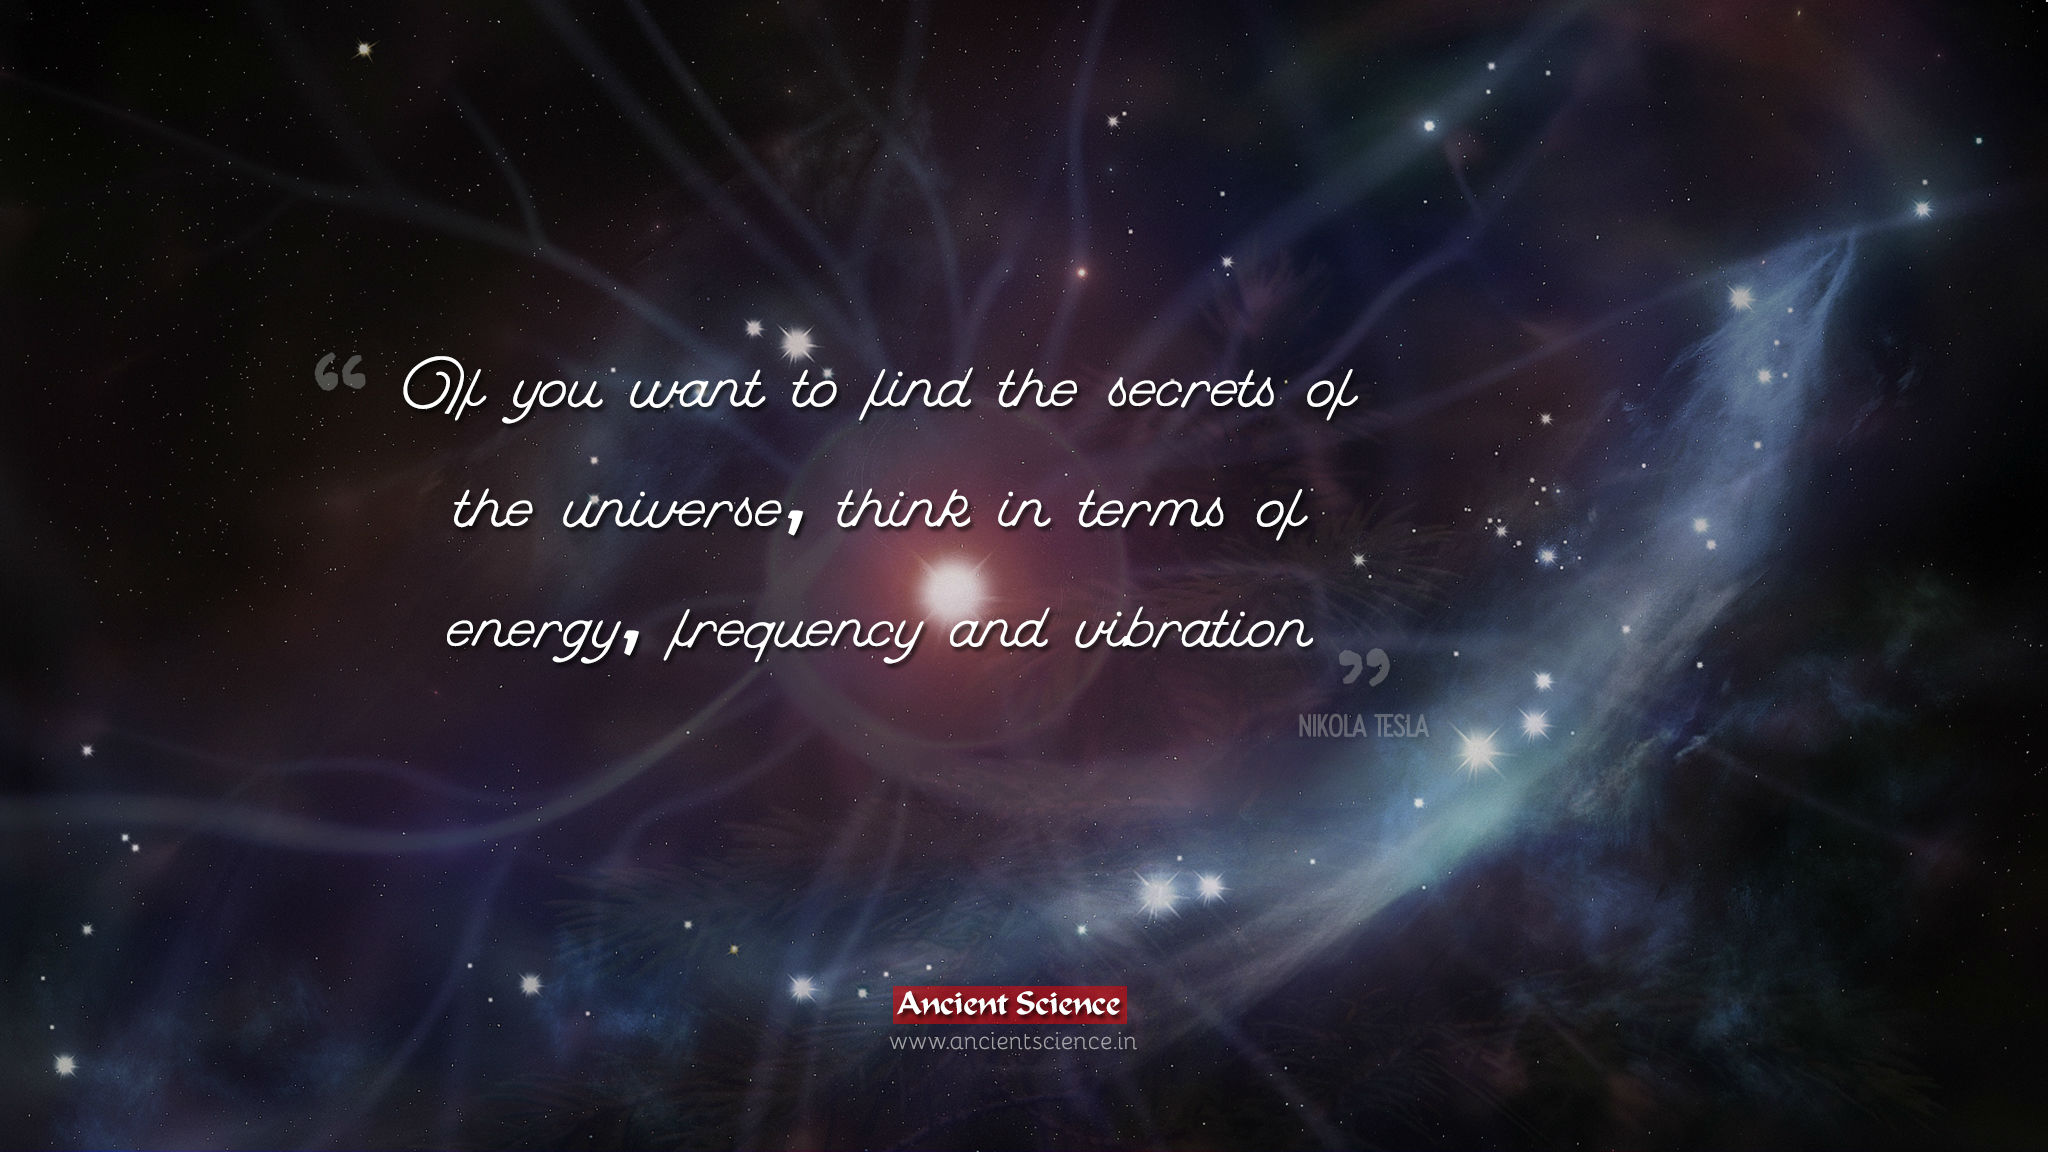 If you want to find the secrets of the universe, think in terms of energy, frequency and vibration.